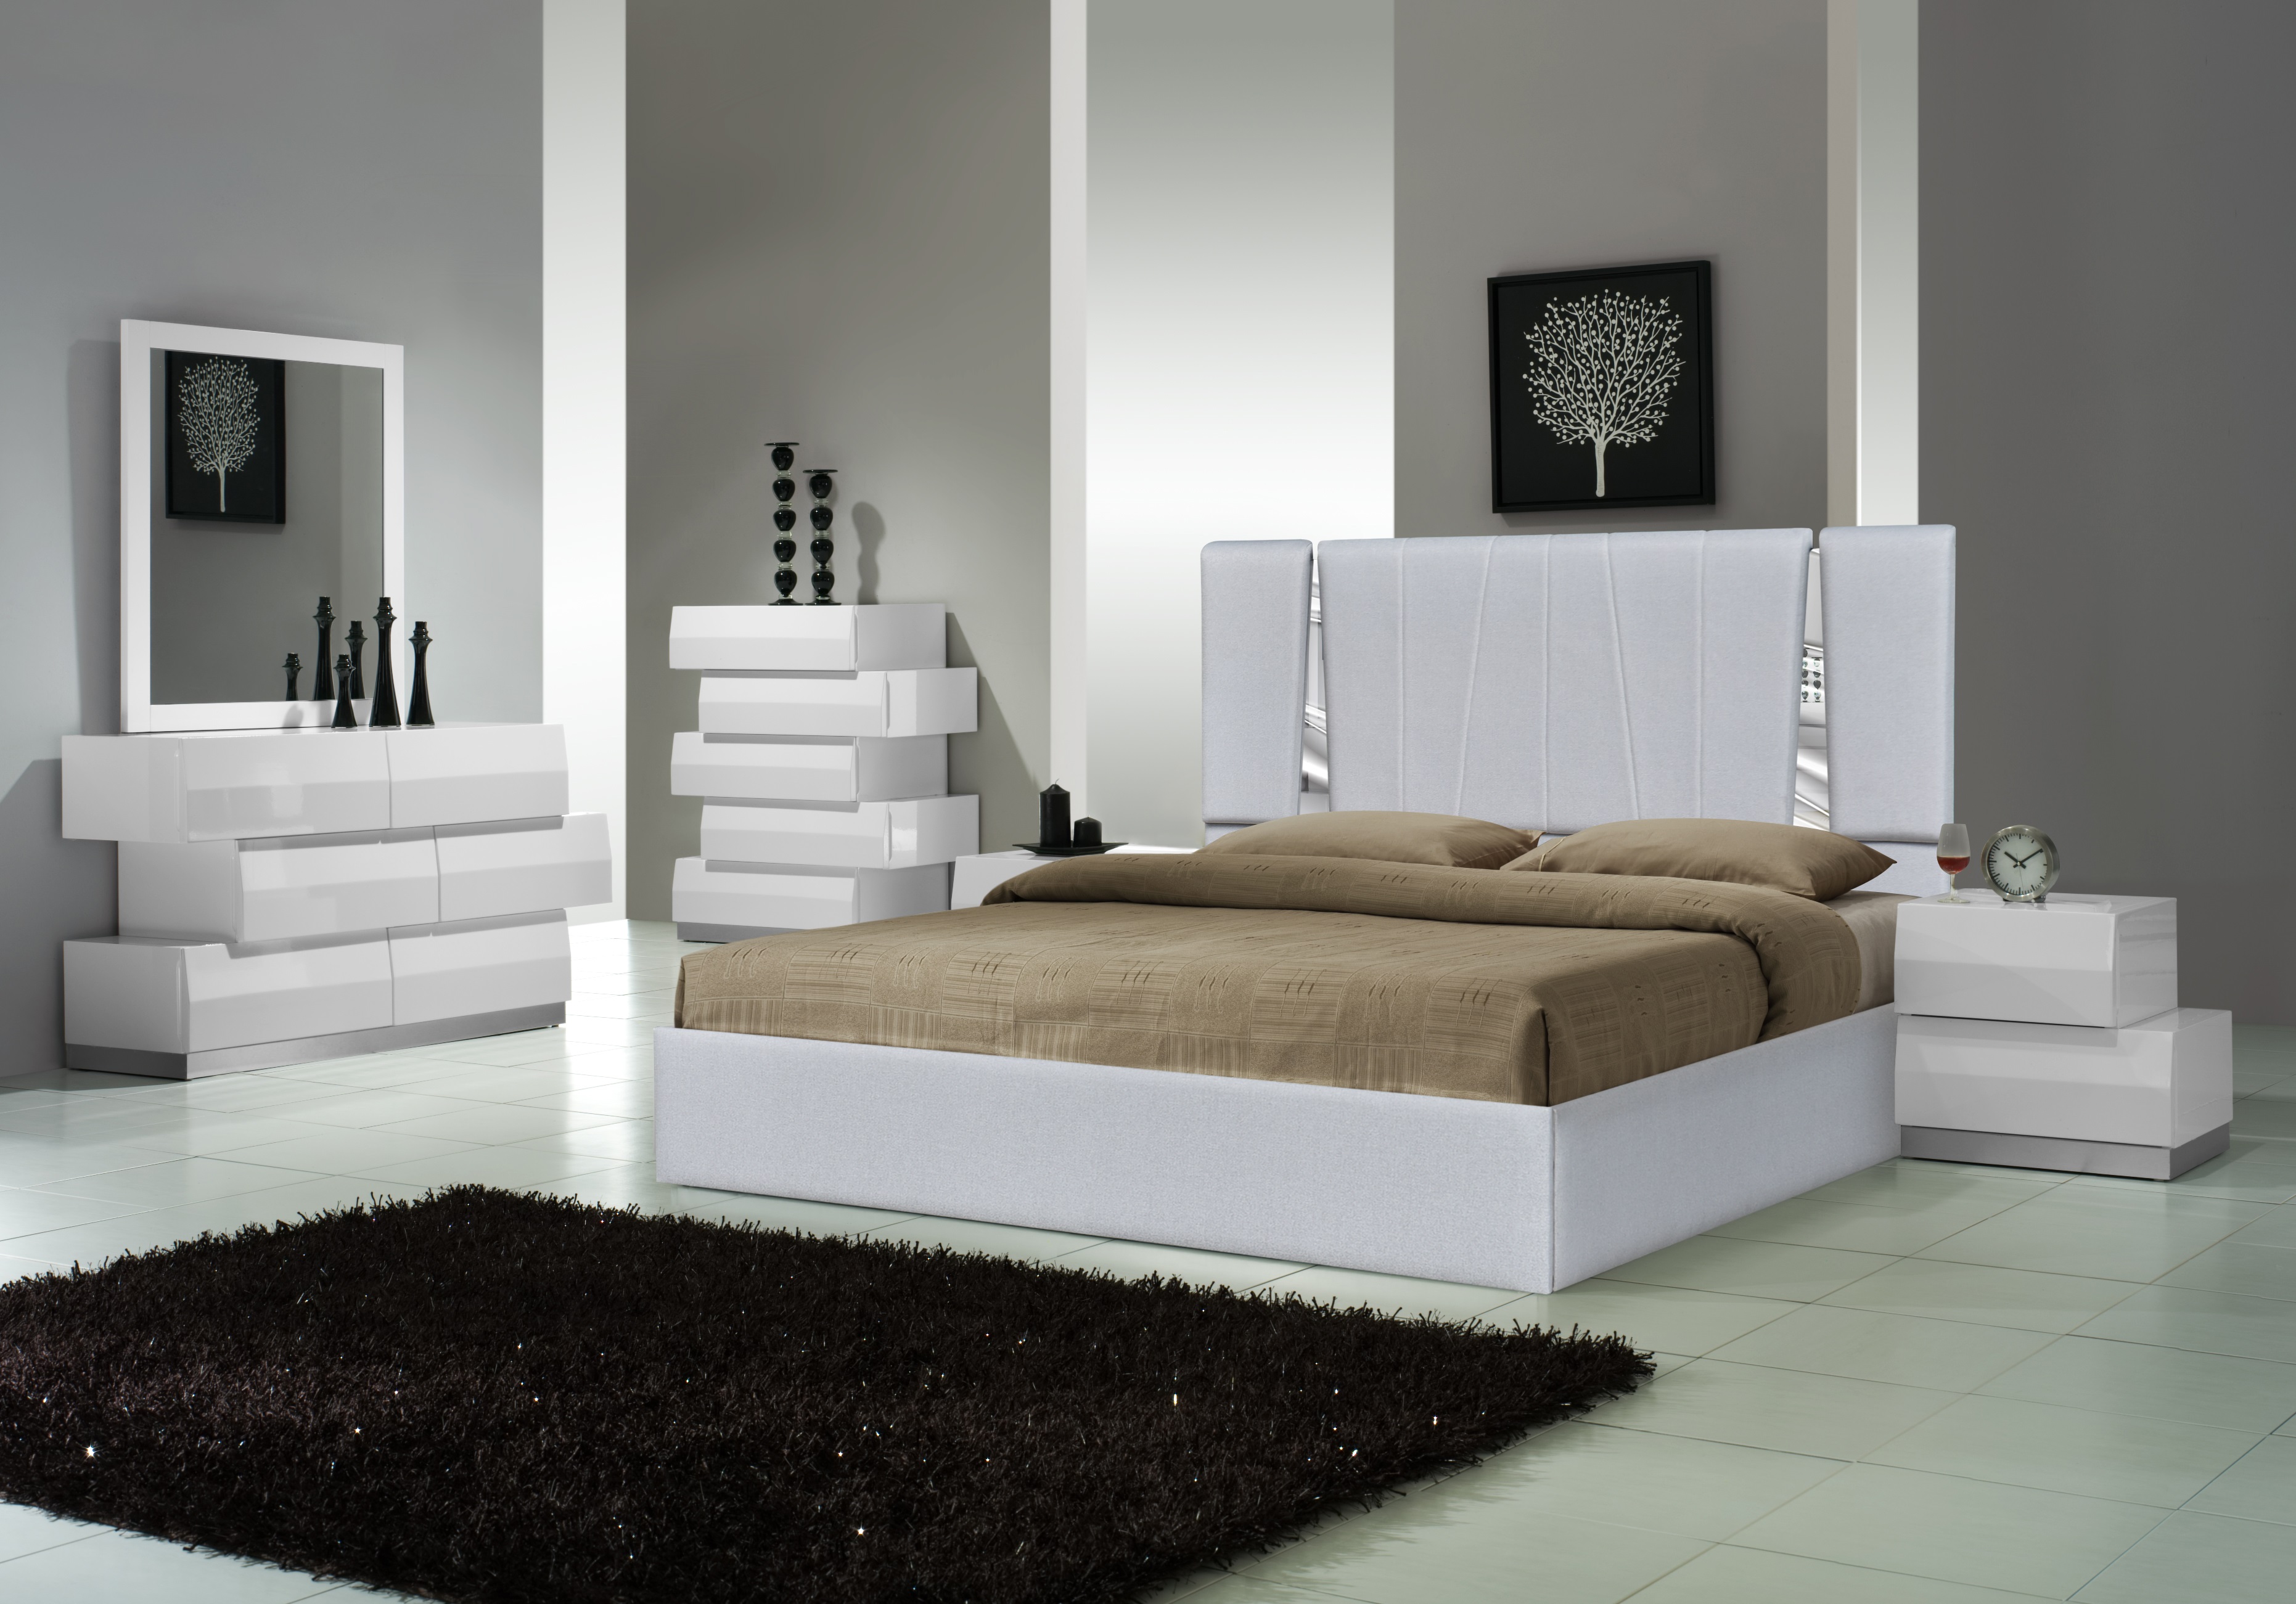 Exquisite Wood Modern Contemporary Bedroom Designs in Black and White - Click Image to Close